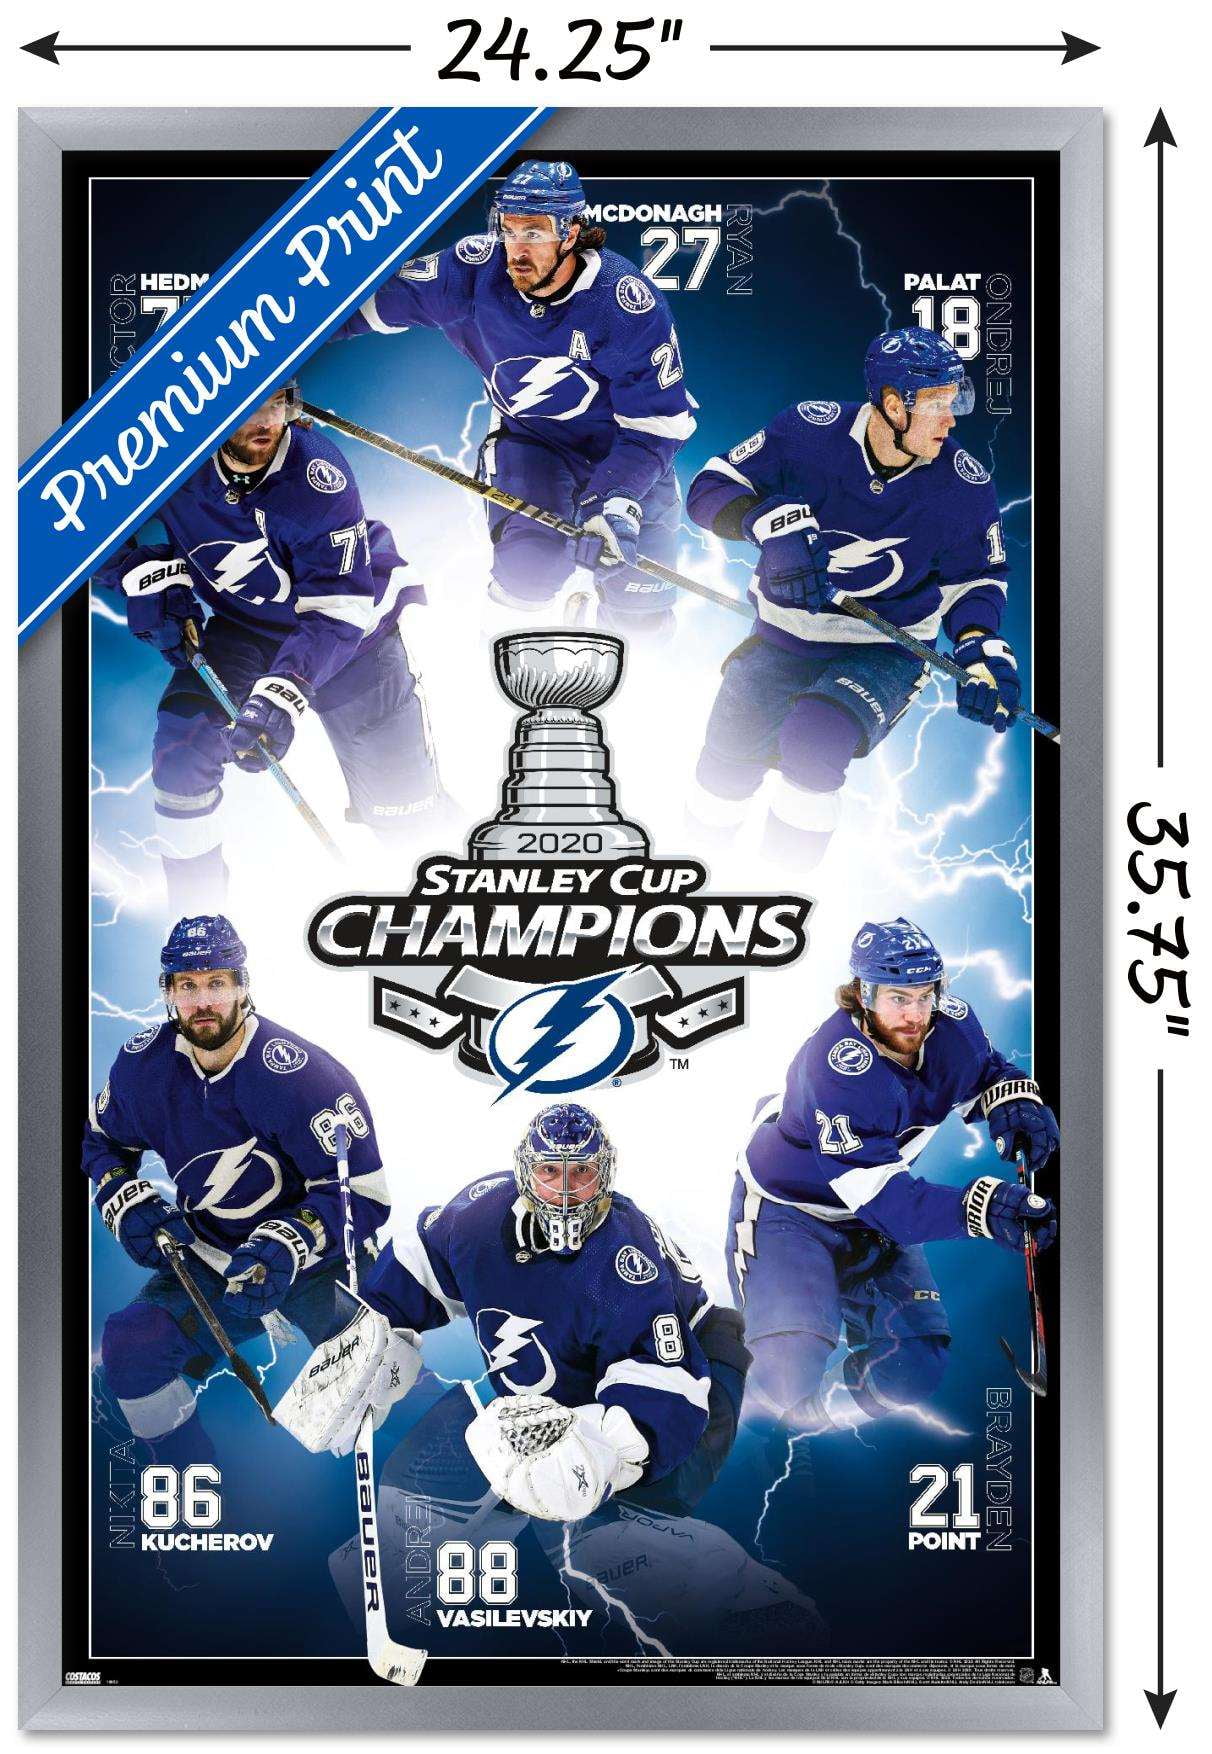 Stanley Cup Tampa Bay Lightning Jersey NHL Fan Apparel & Souvenirs for sale